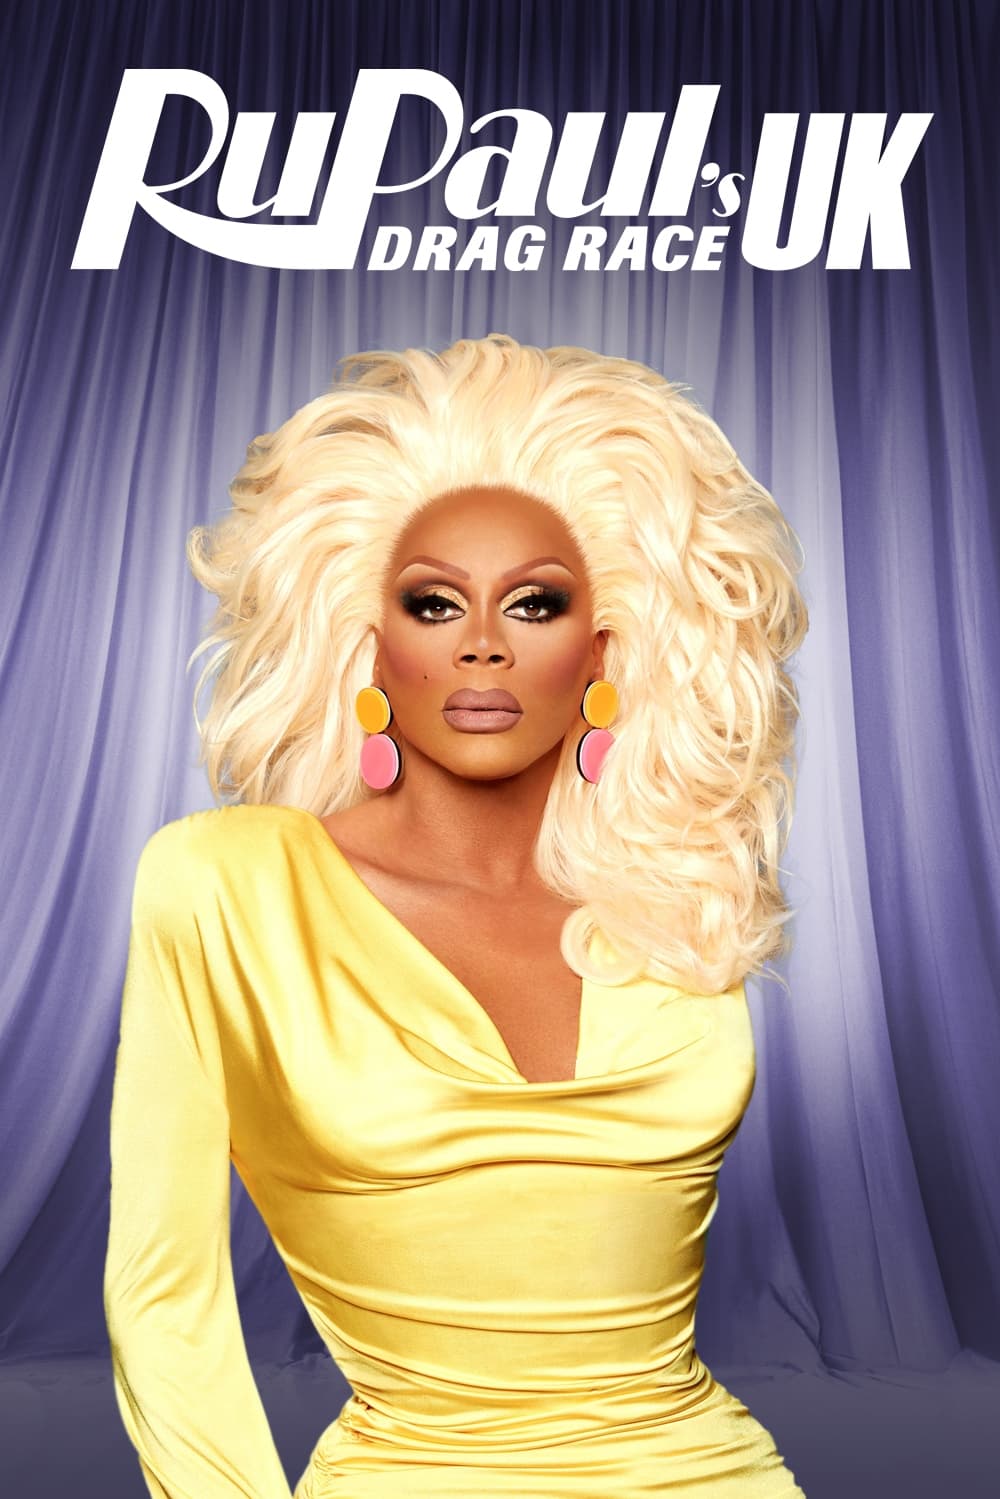 RuPaul's Drag Race UK TV Shows About Drag Queen